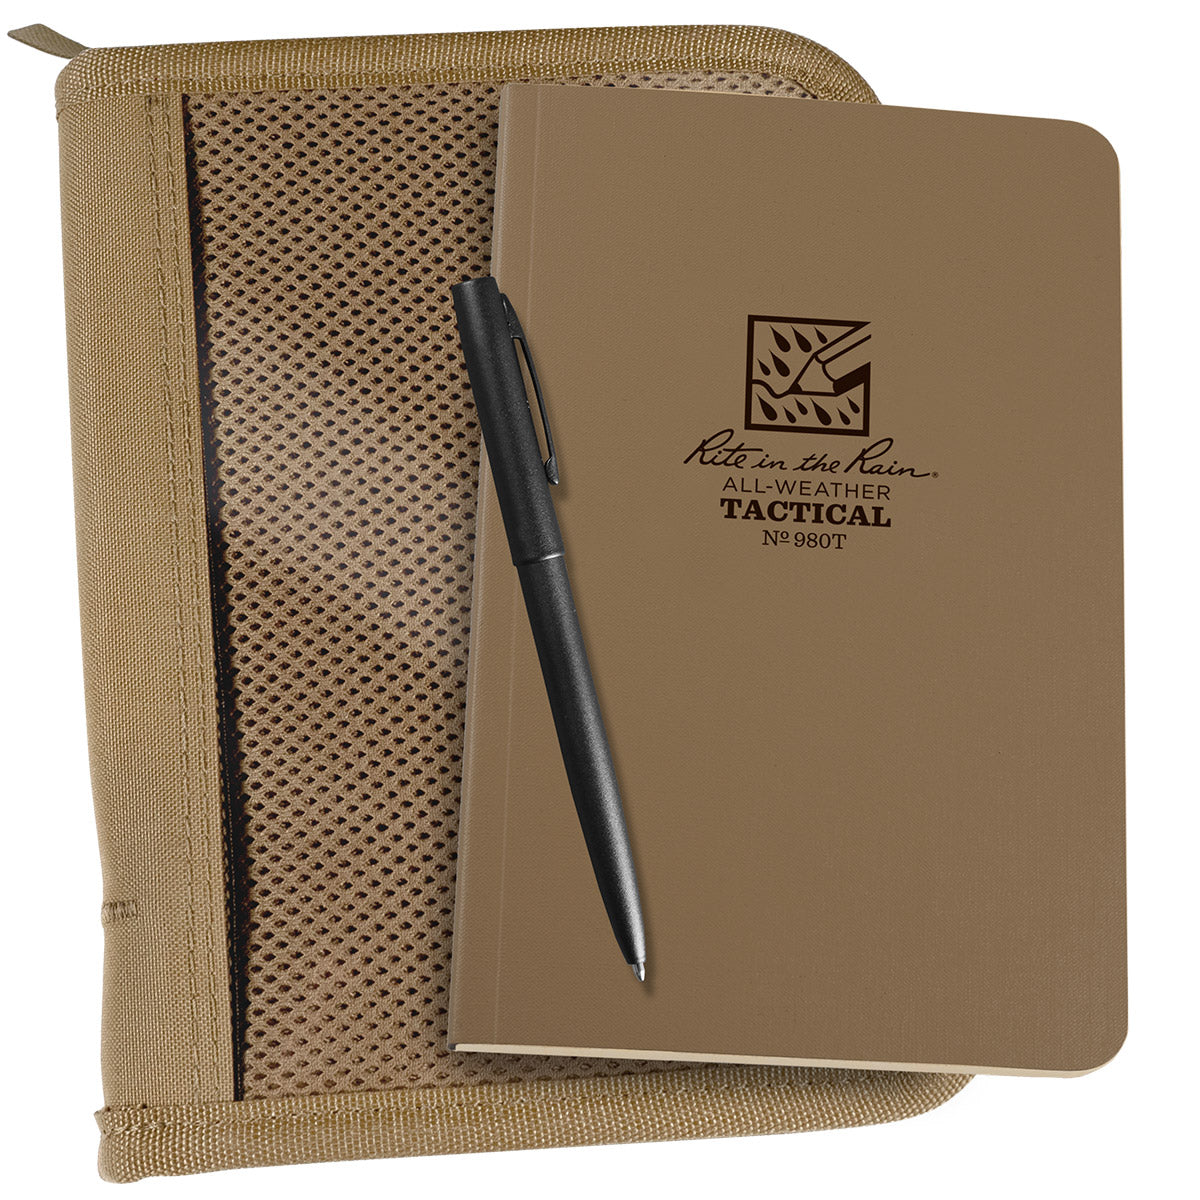 Rite in the Rain All-Weather Tactical Field Book Land Nav Kit Tan Field Flex Book / Tan Cordura Cover Pens, Notebooks and Stationery Rite in the Rain Tactical Gear Supplier Tactical Distributors Australia